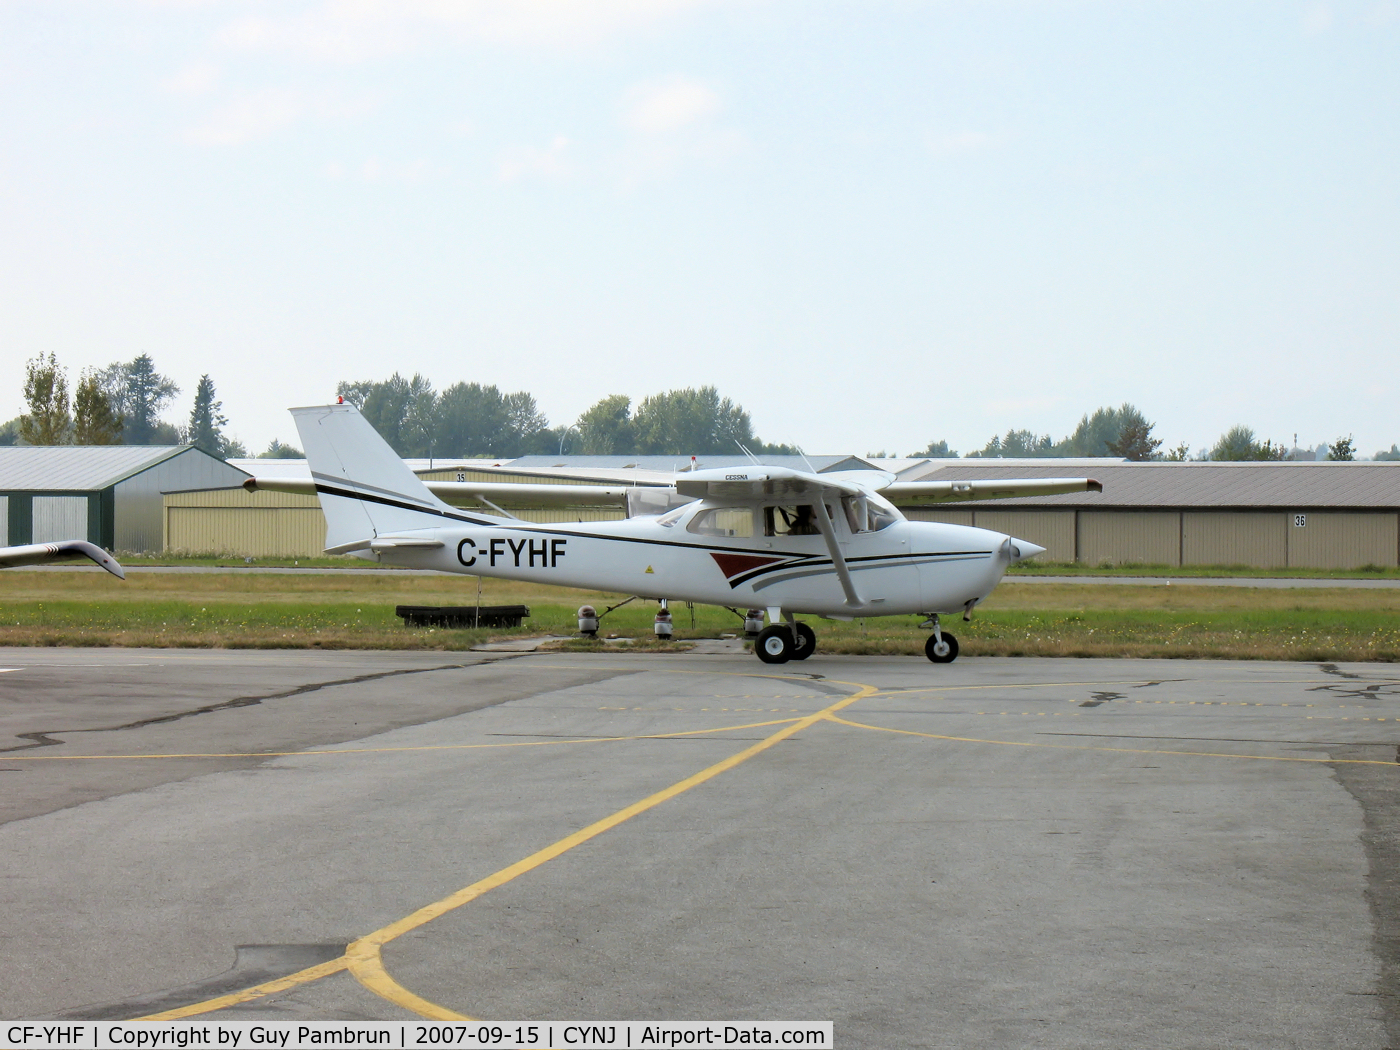 CF-YHF, 1969 Cessna 172K Skyhawk C/N 17258086, Heading out to the active